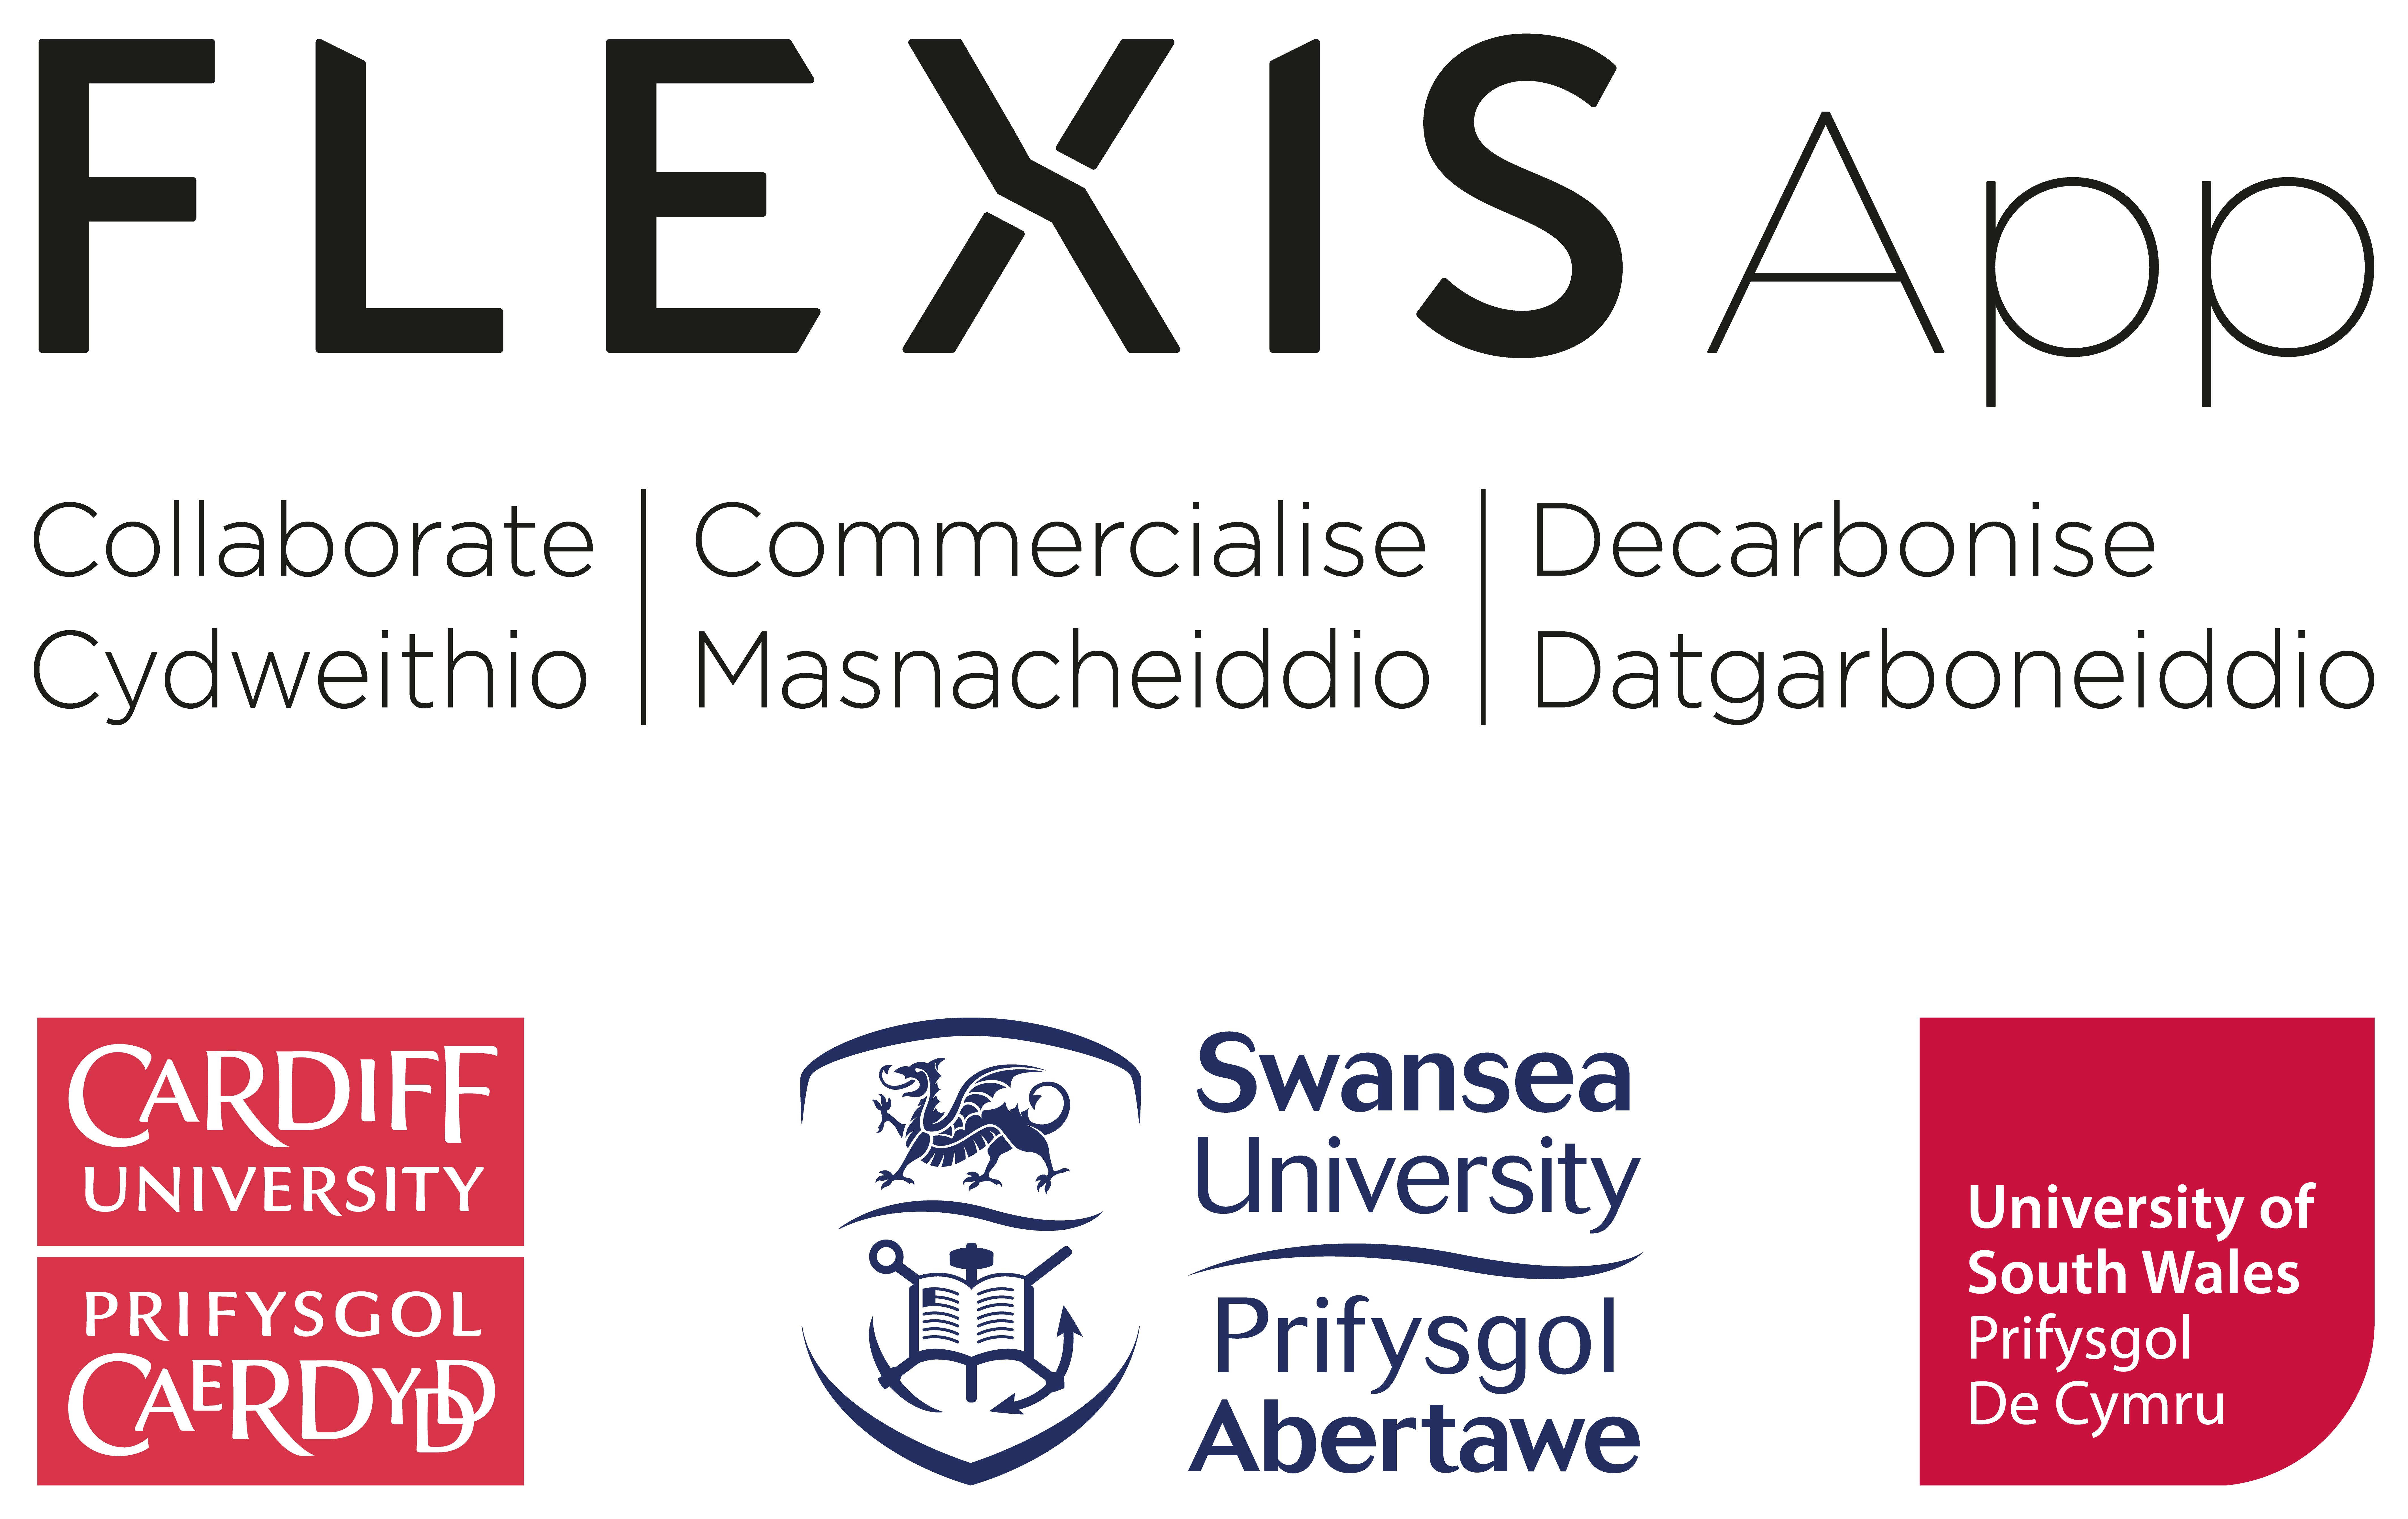 FLEXISApp project logo with partnership universities Cardiff, Swansea and University of South Wales